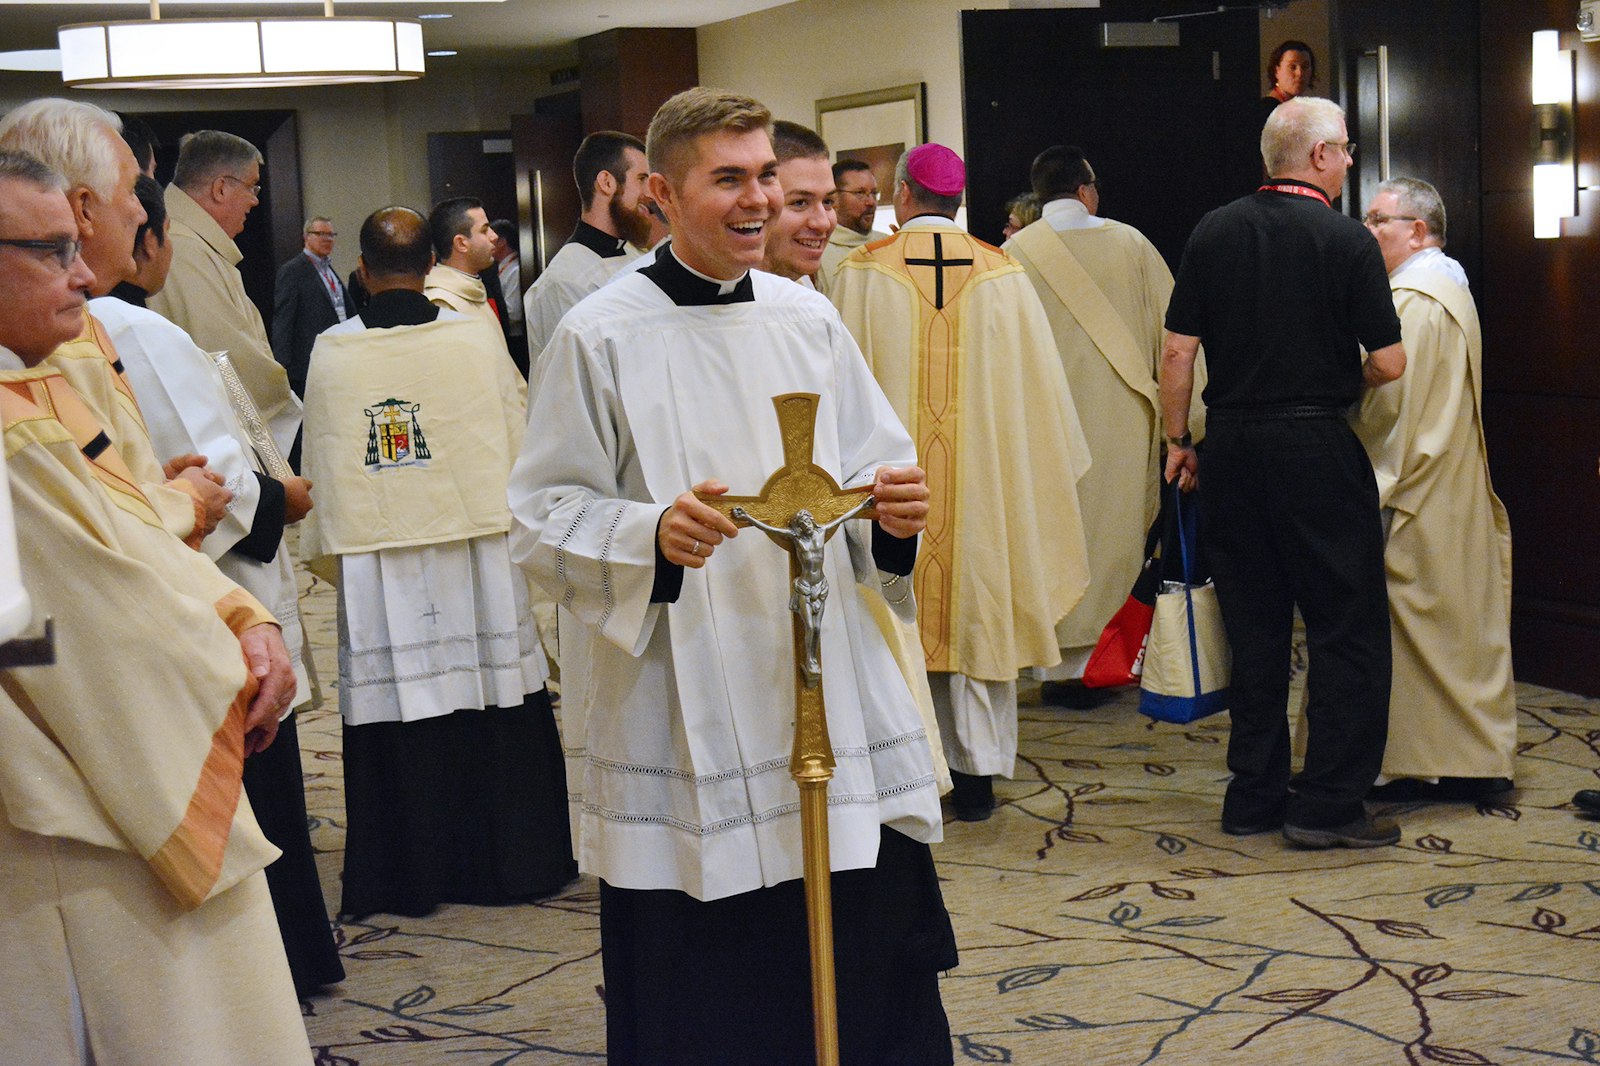 Seminarian Adam Nowak, now Fr. Adam Nowak, smiles as he holds the crucifix used in the opening procession of Synod 16 as clergy and laity gather for the opening session inside the Westin Book Cadillac hotel on Nov. 18, 2016. (Michael Stechschulte | Detroit Catholic)